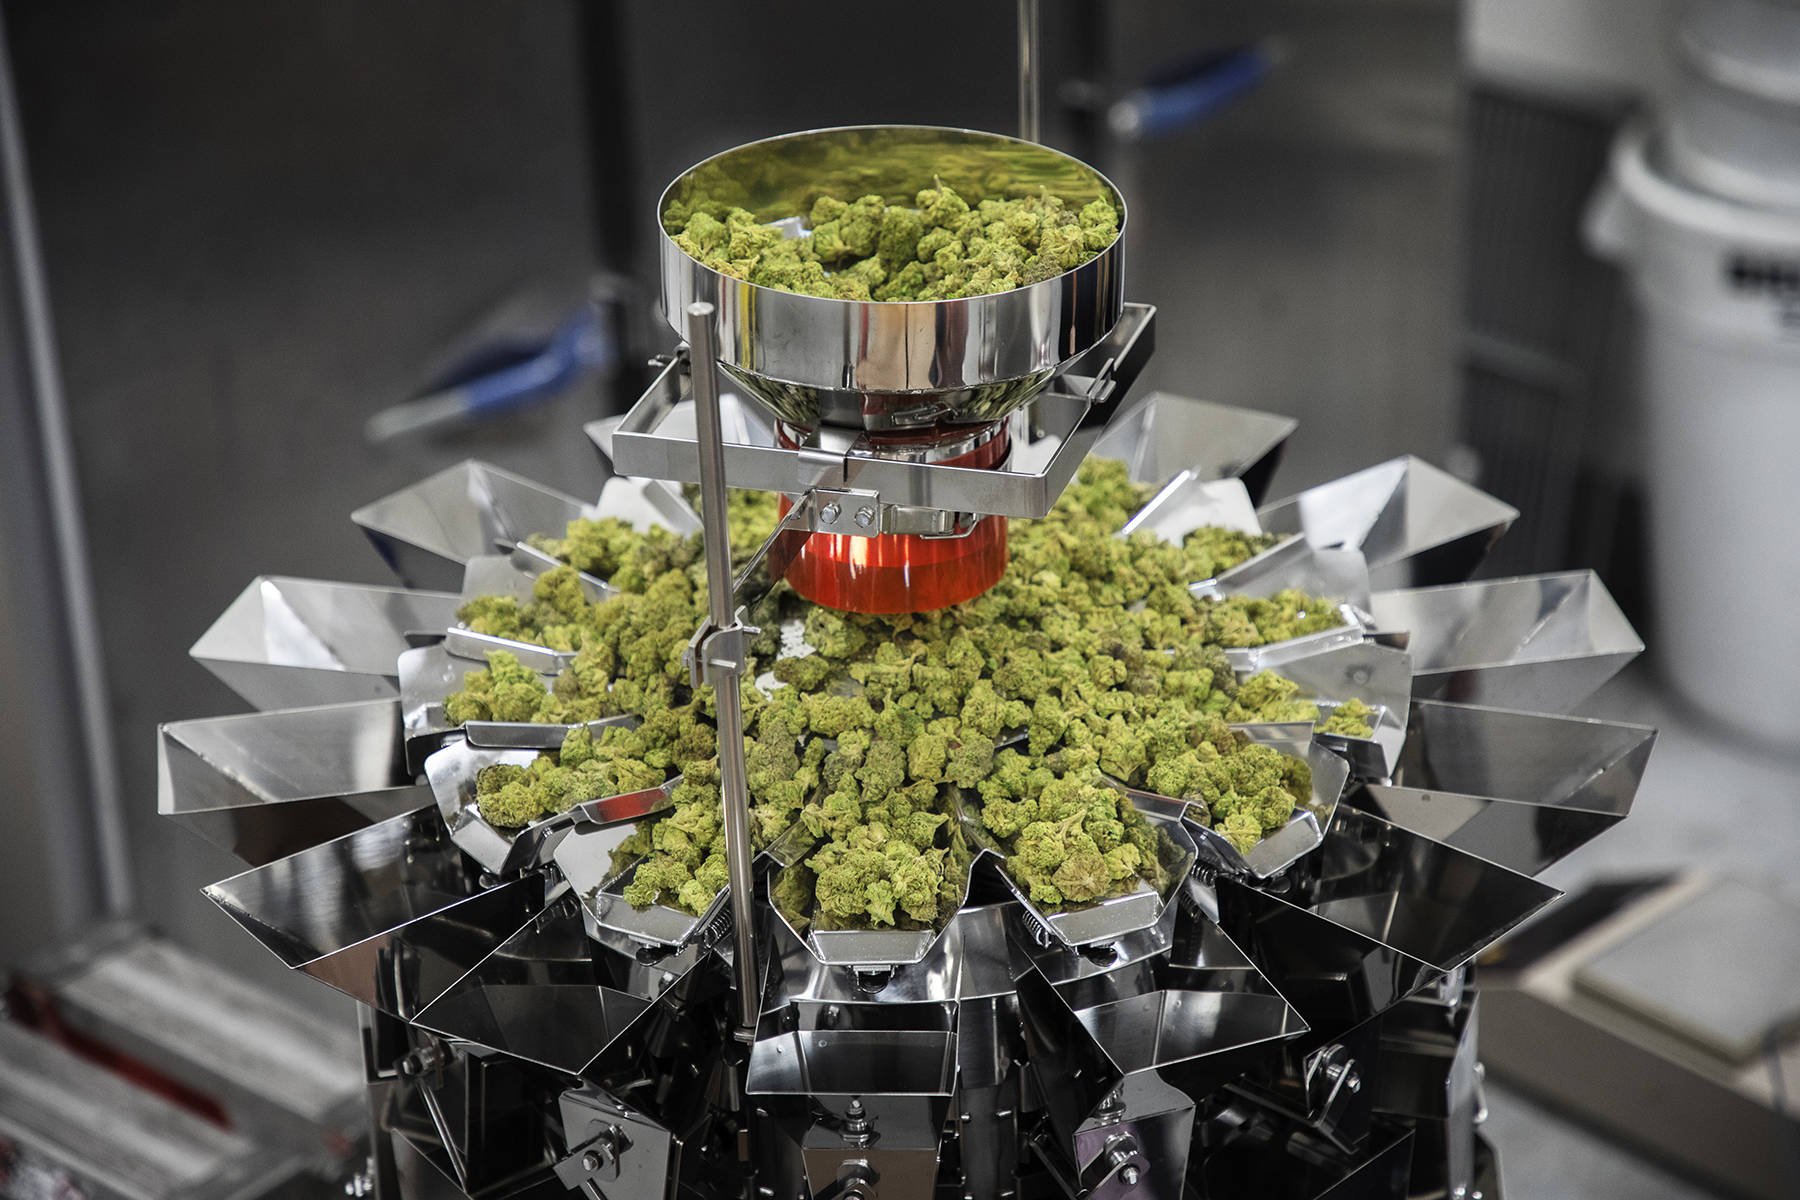 Weigher for cannabis-based applications